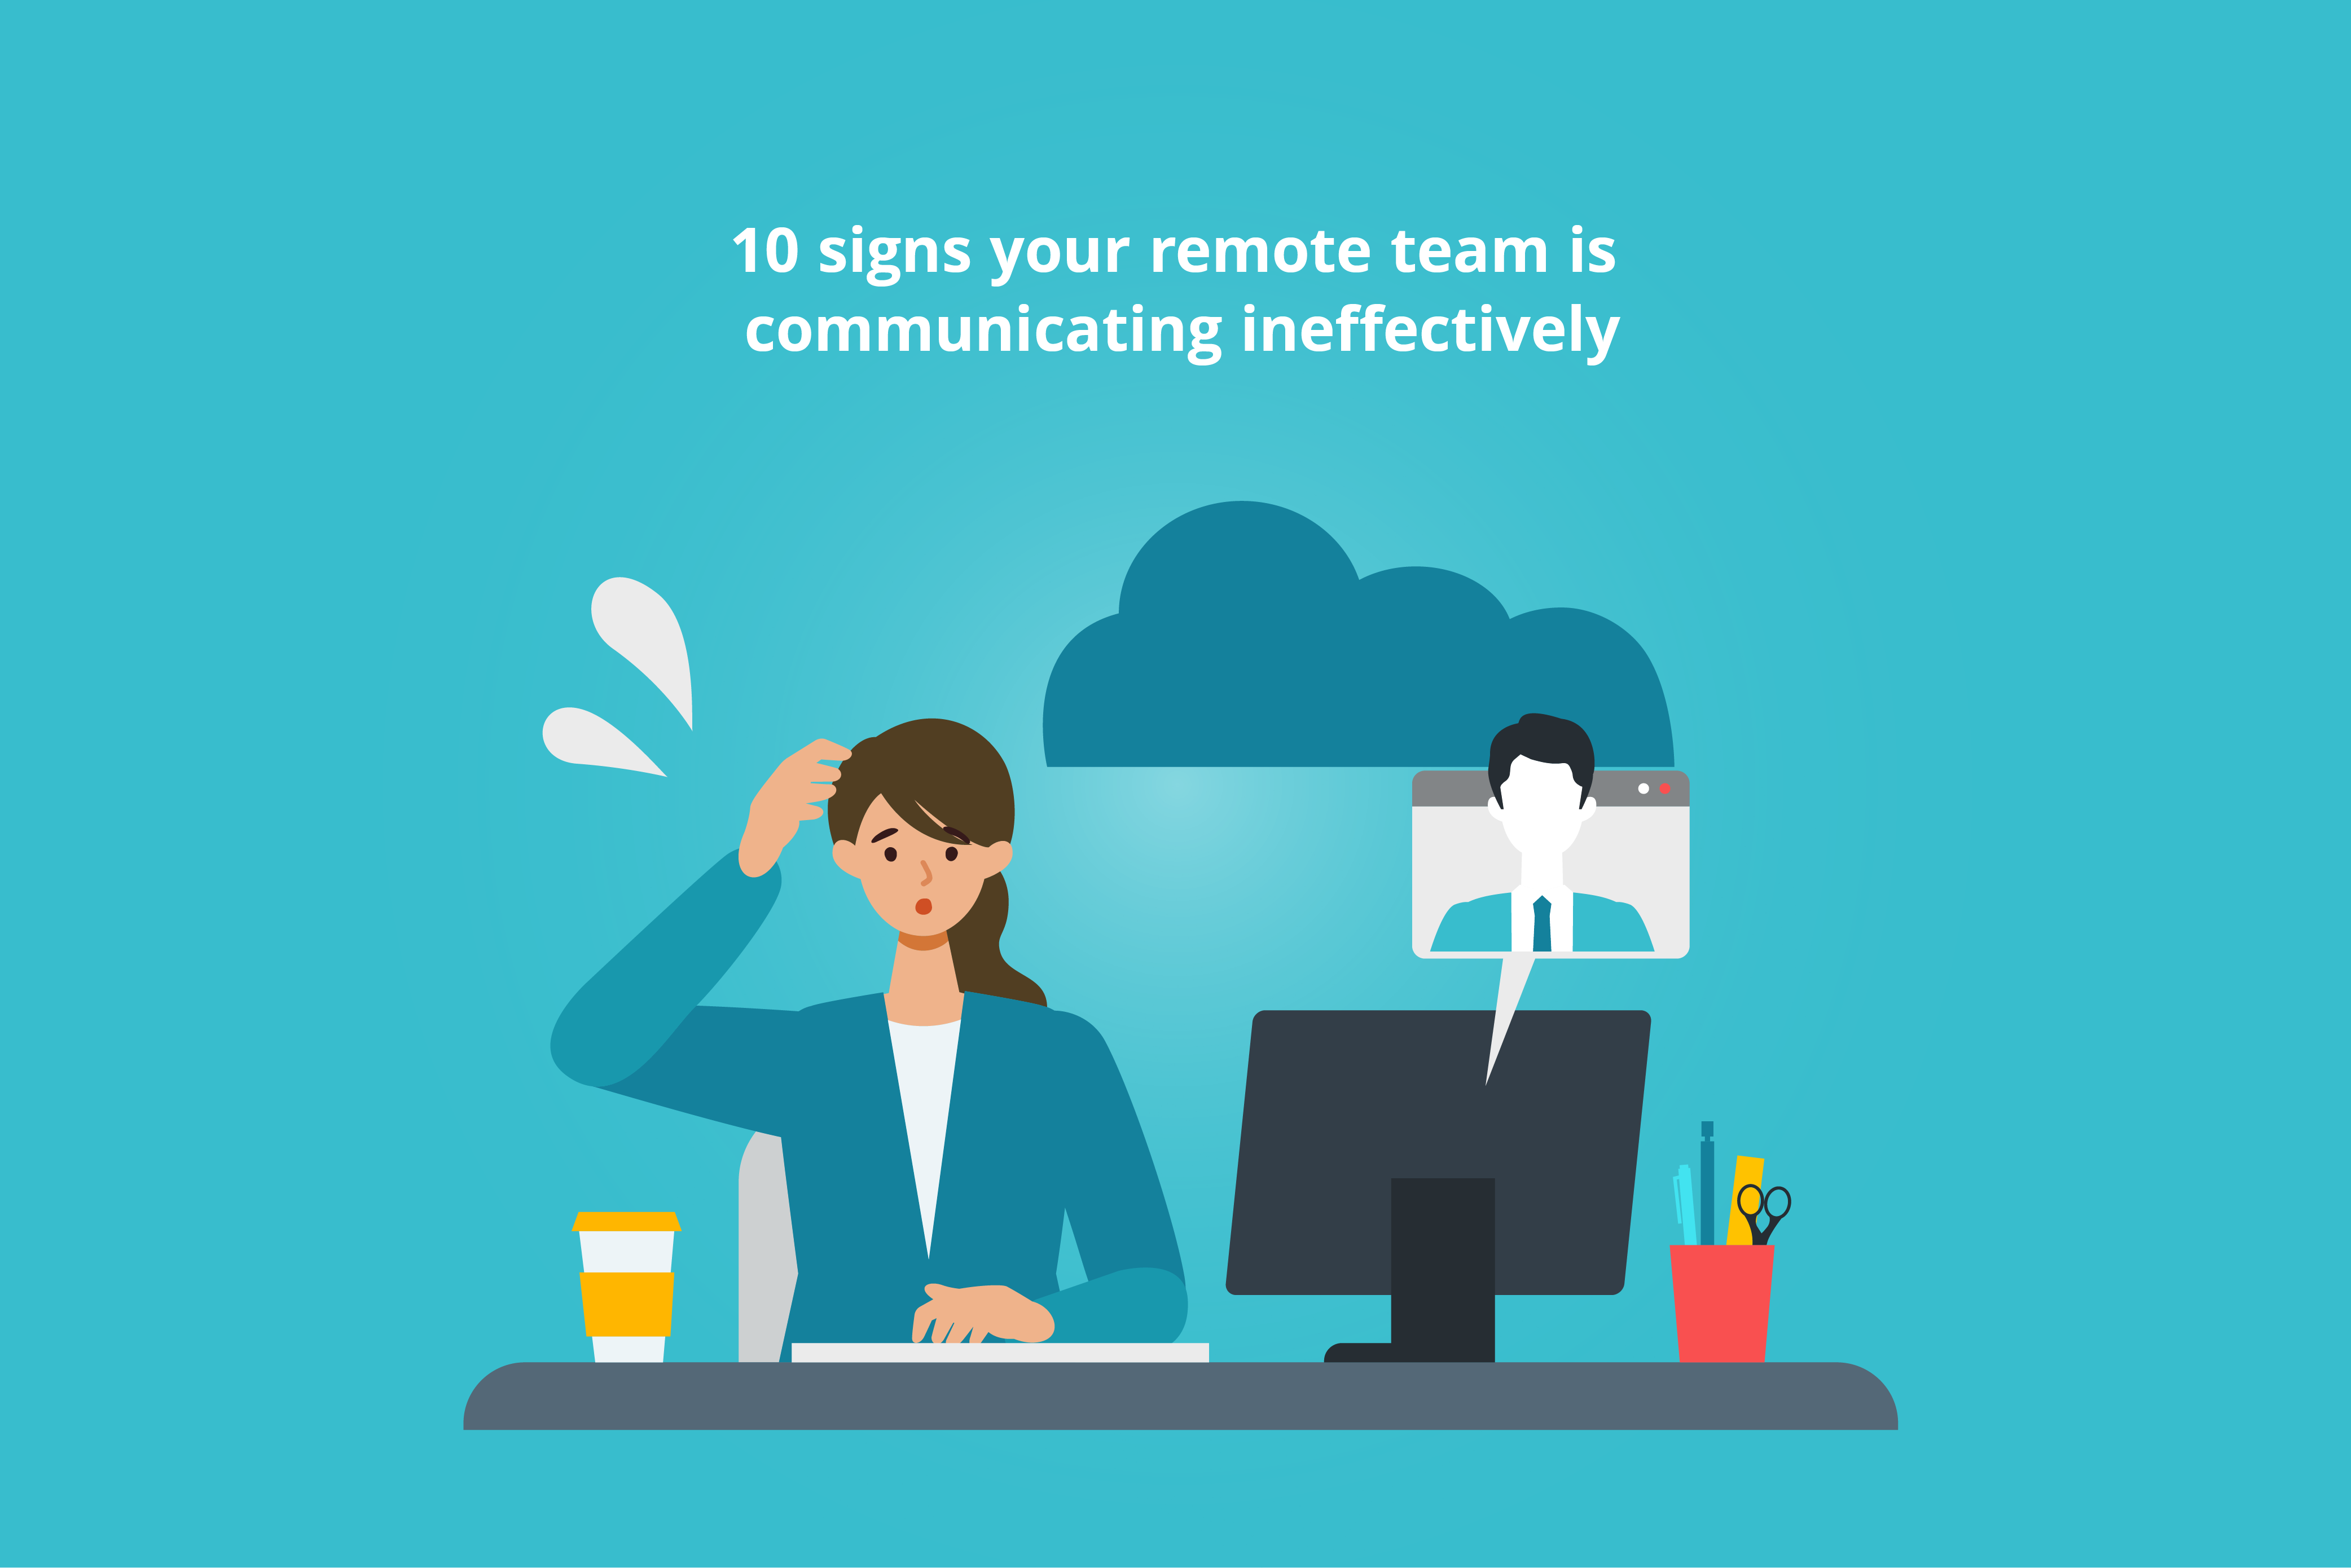 A worker is dealing with ineffective communication on her remote team.